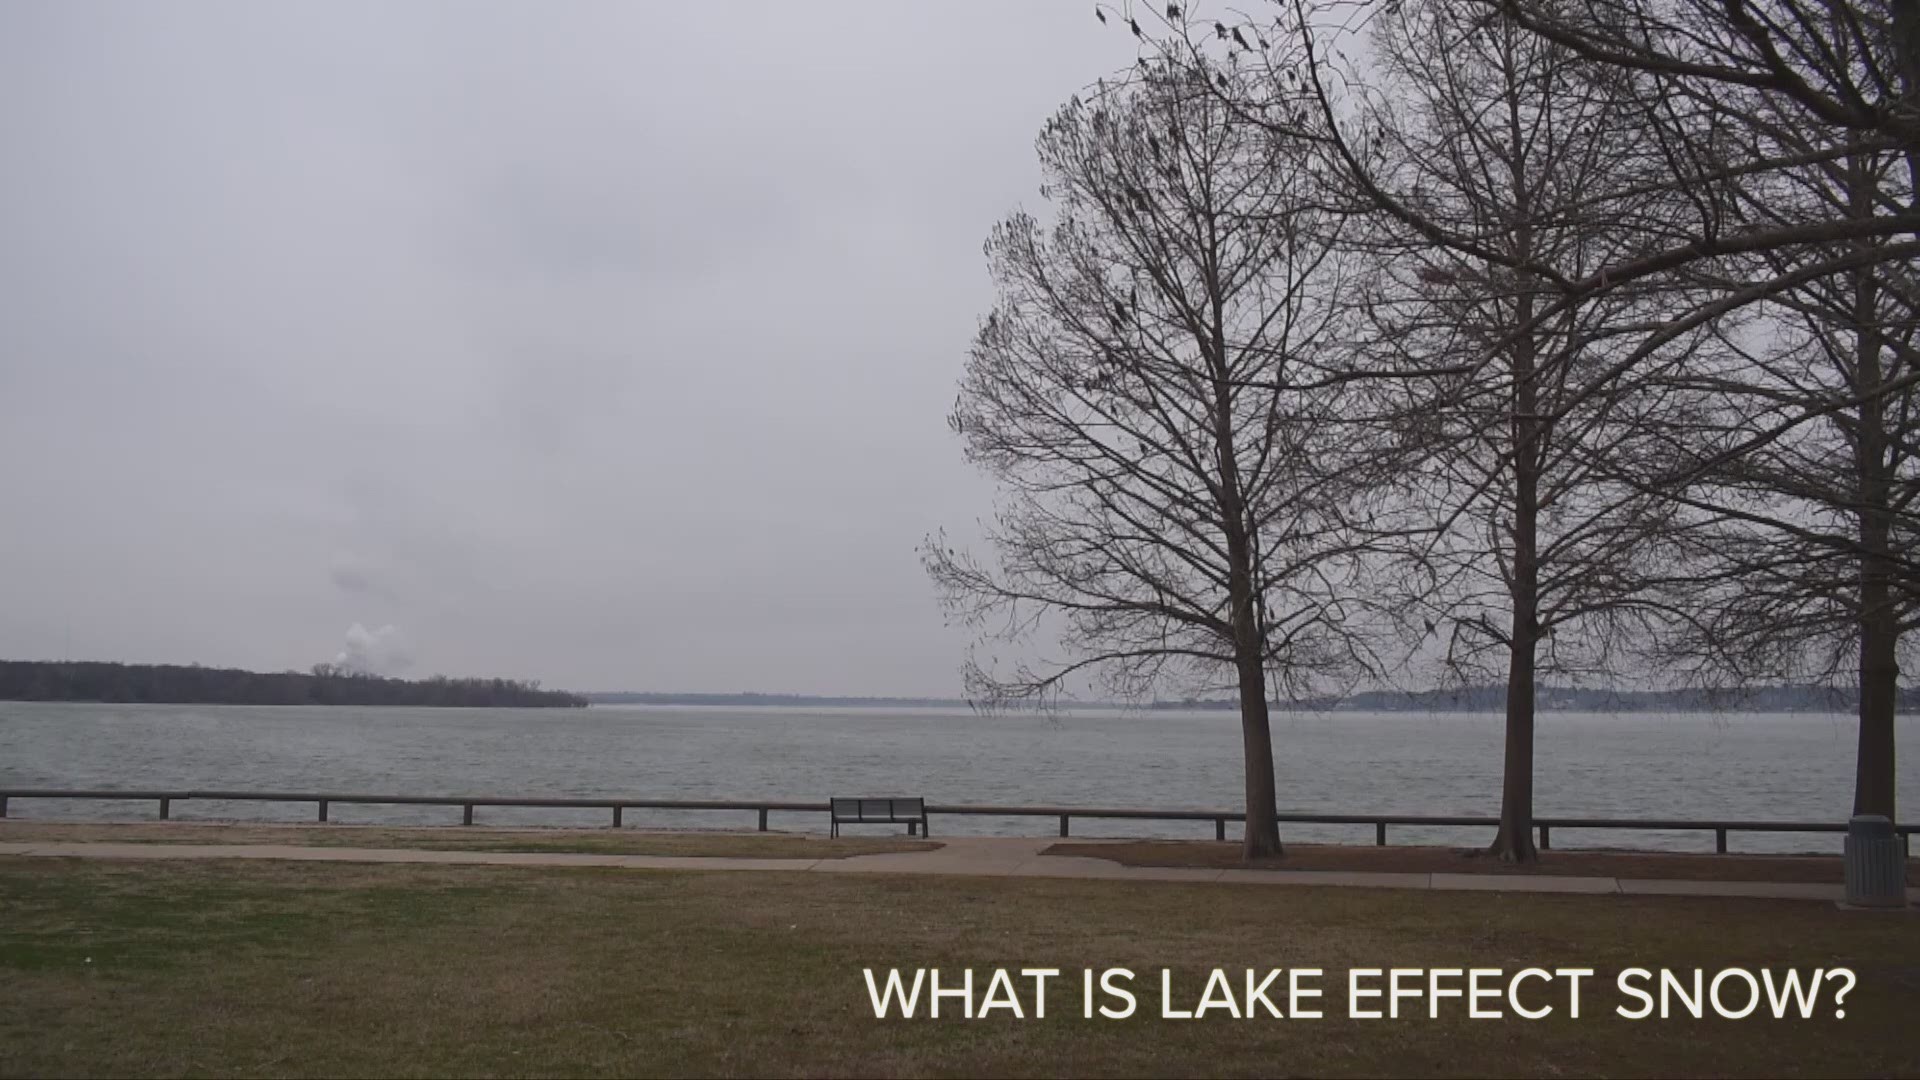 Lake effect snow is mostly associated with the Great Lakes, but sometimes it happens in North Texas. So what is it?